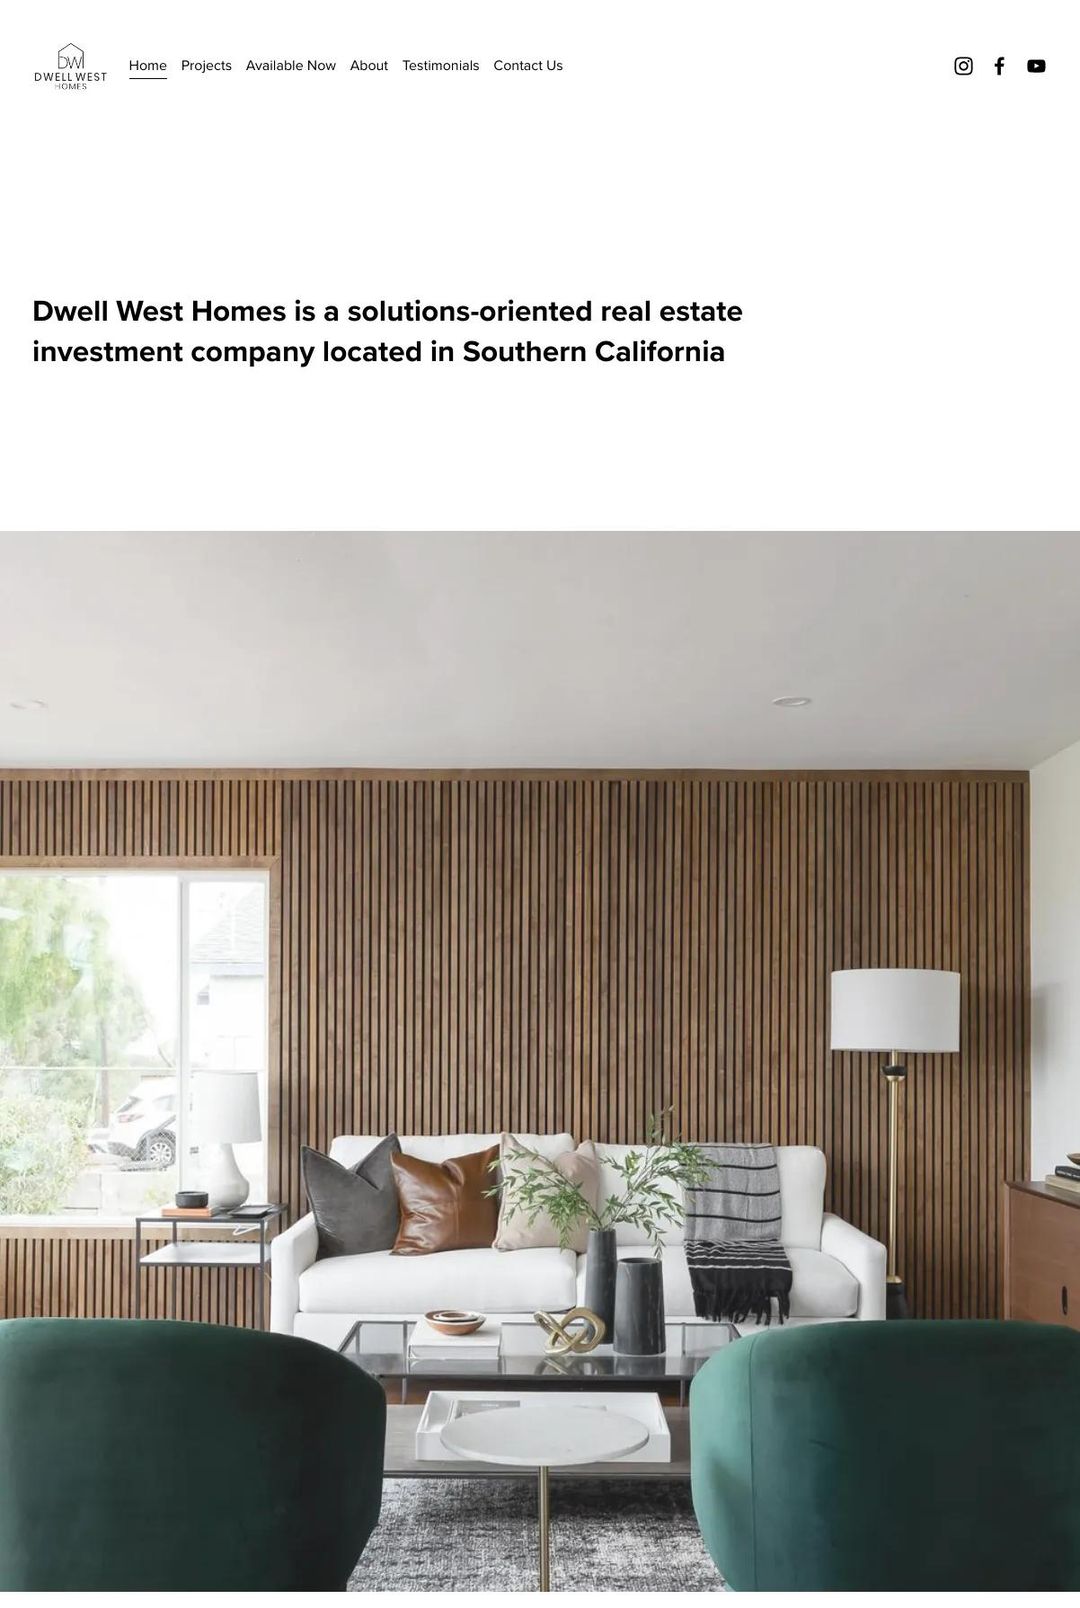 Screenshot 1 of Dwell West Homes (Example Squarespace Real Estate Website)